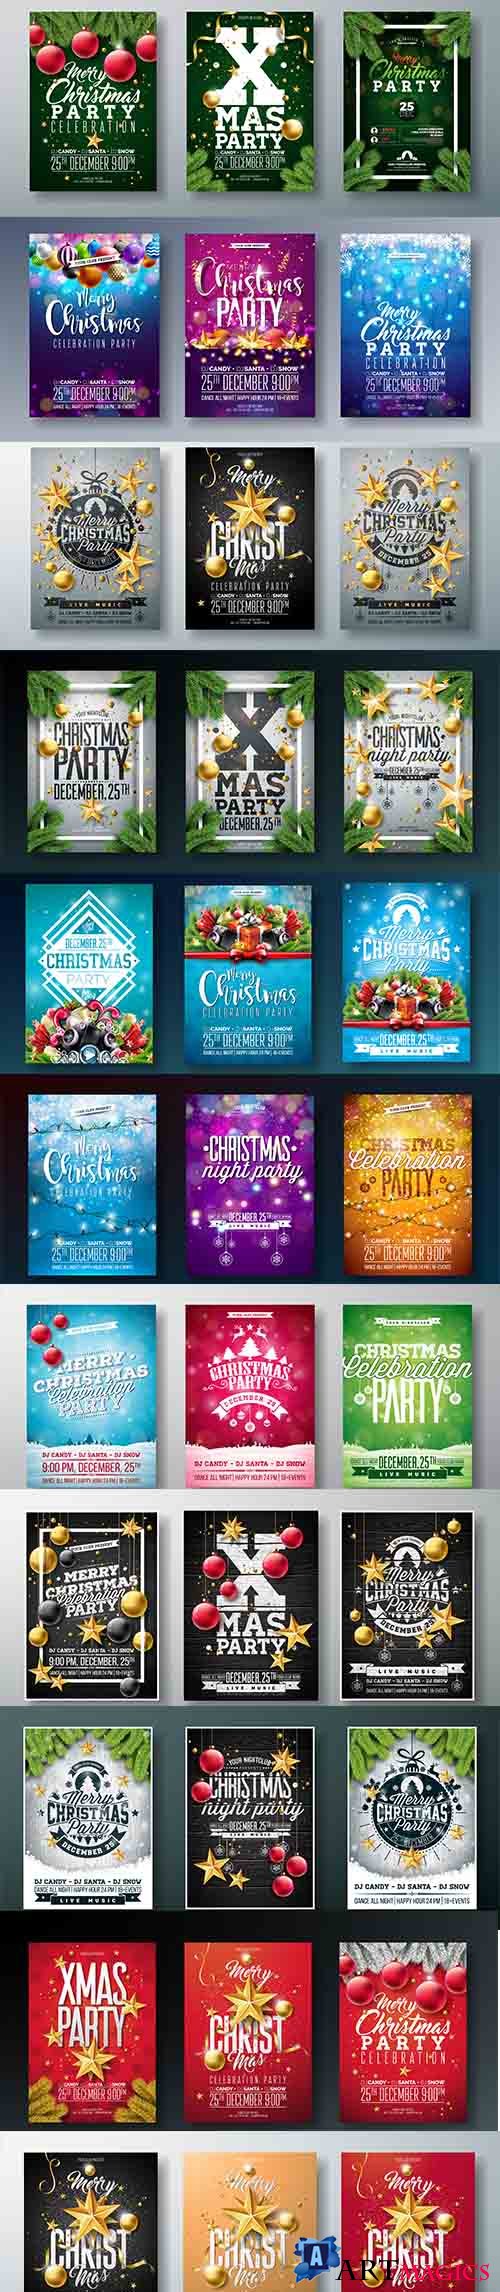 Party flyer Christmas vector Illustration with holiday elements